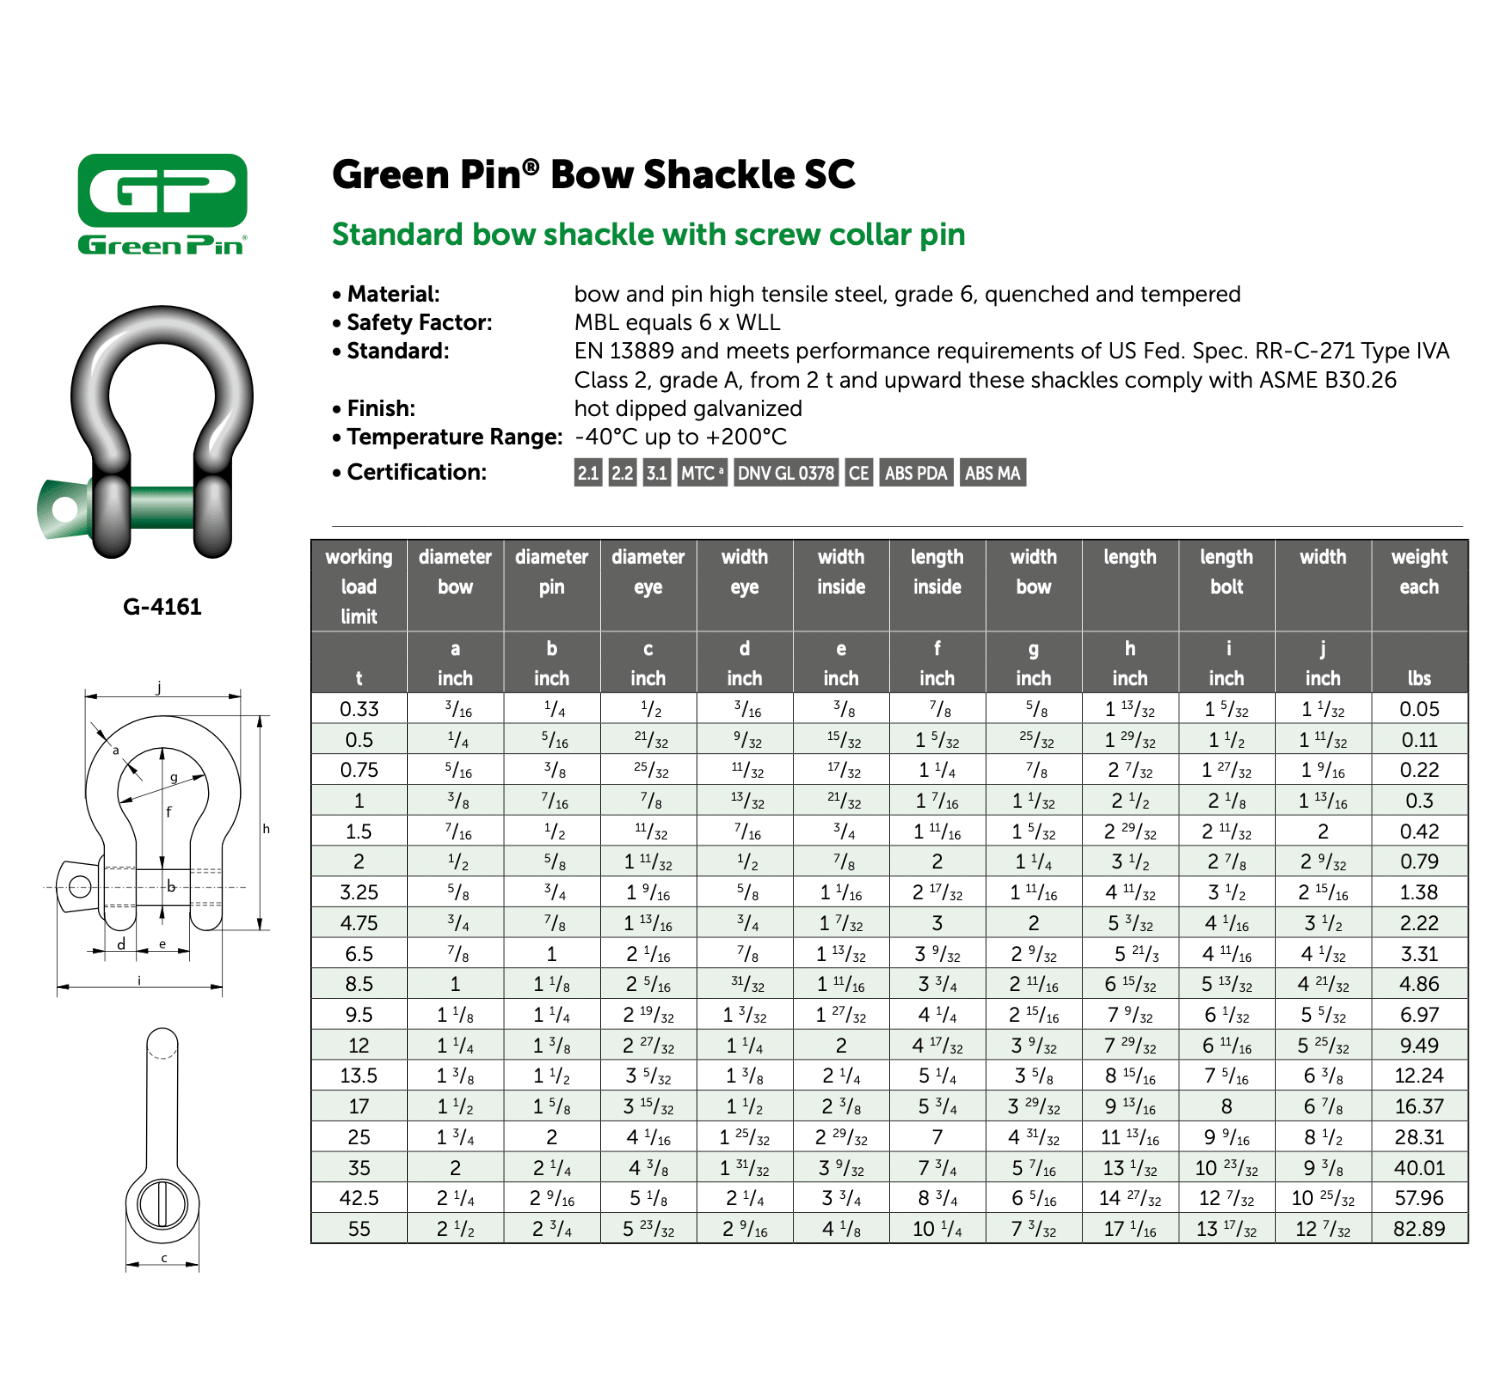 Van Beest G-4161 Screw Pin Anchor Shackle Green Pin Specifications